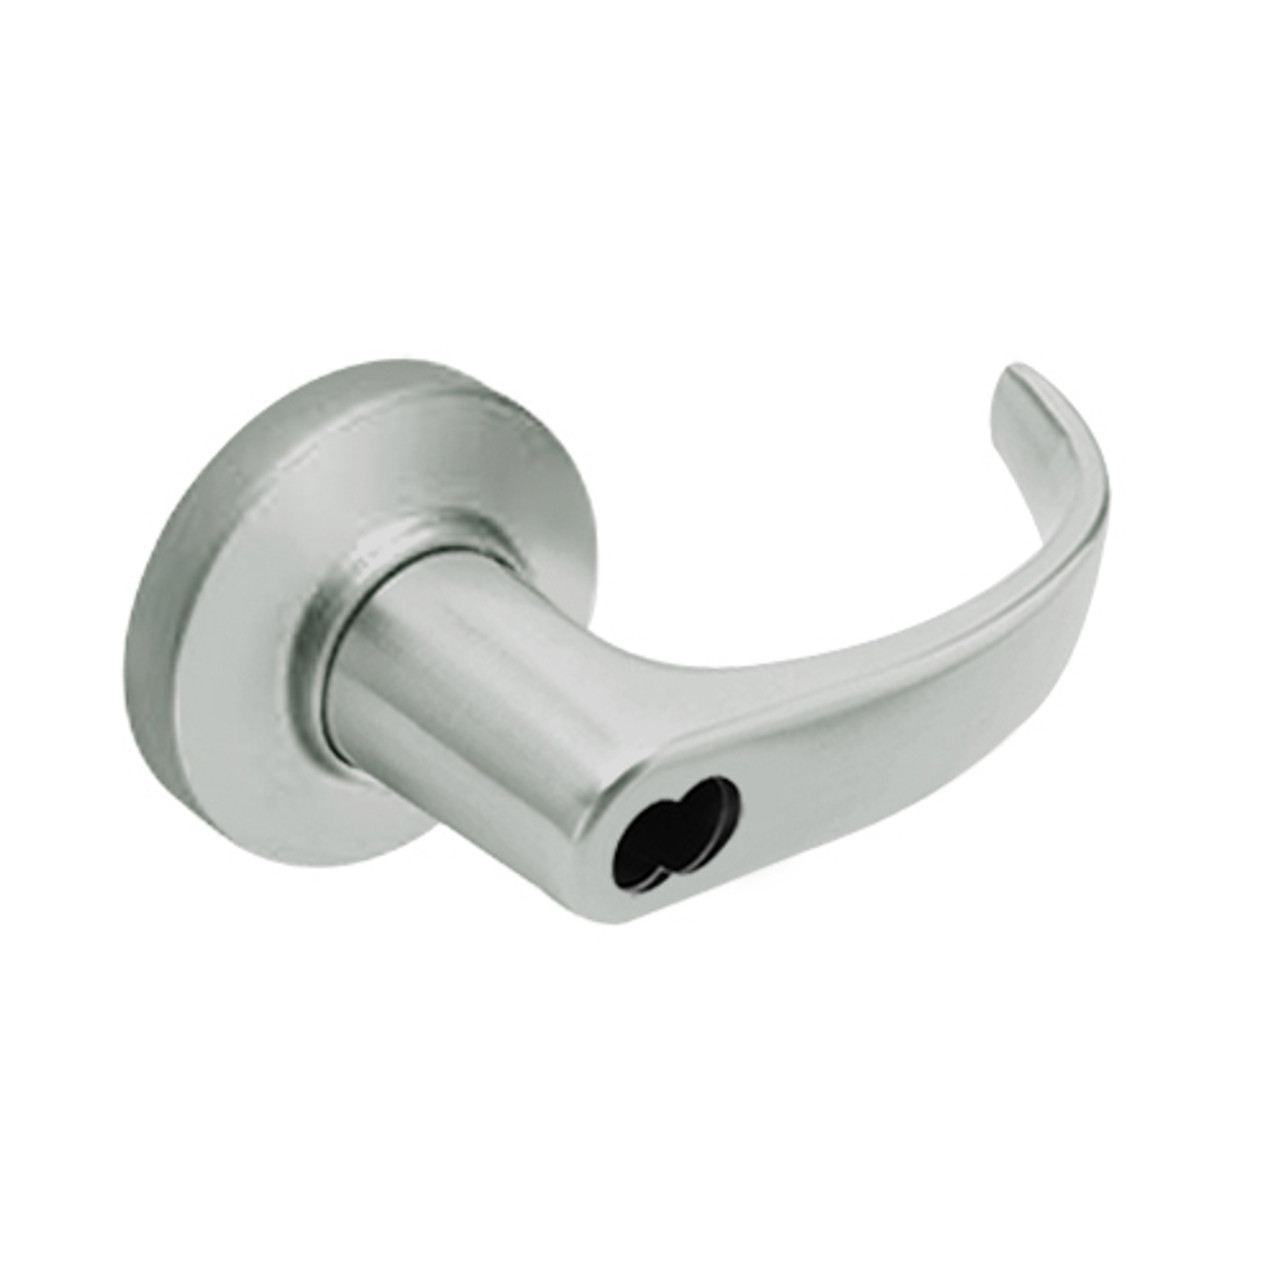 9K37XD14CSTK619 Best 9K Series Special Function Cylindrical Lever Locks with Curved with Return Lever Design Accept 7 Pin Best Core in Satin Nickel